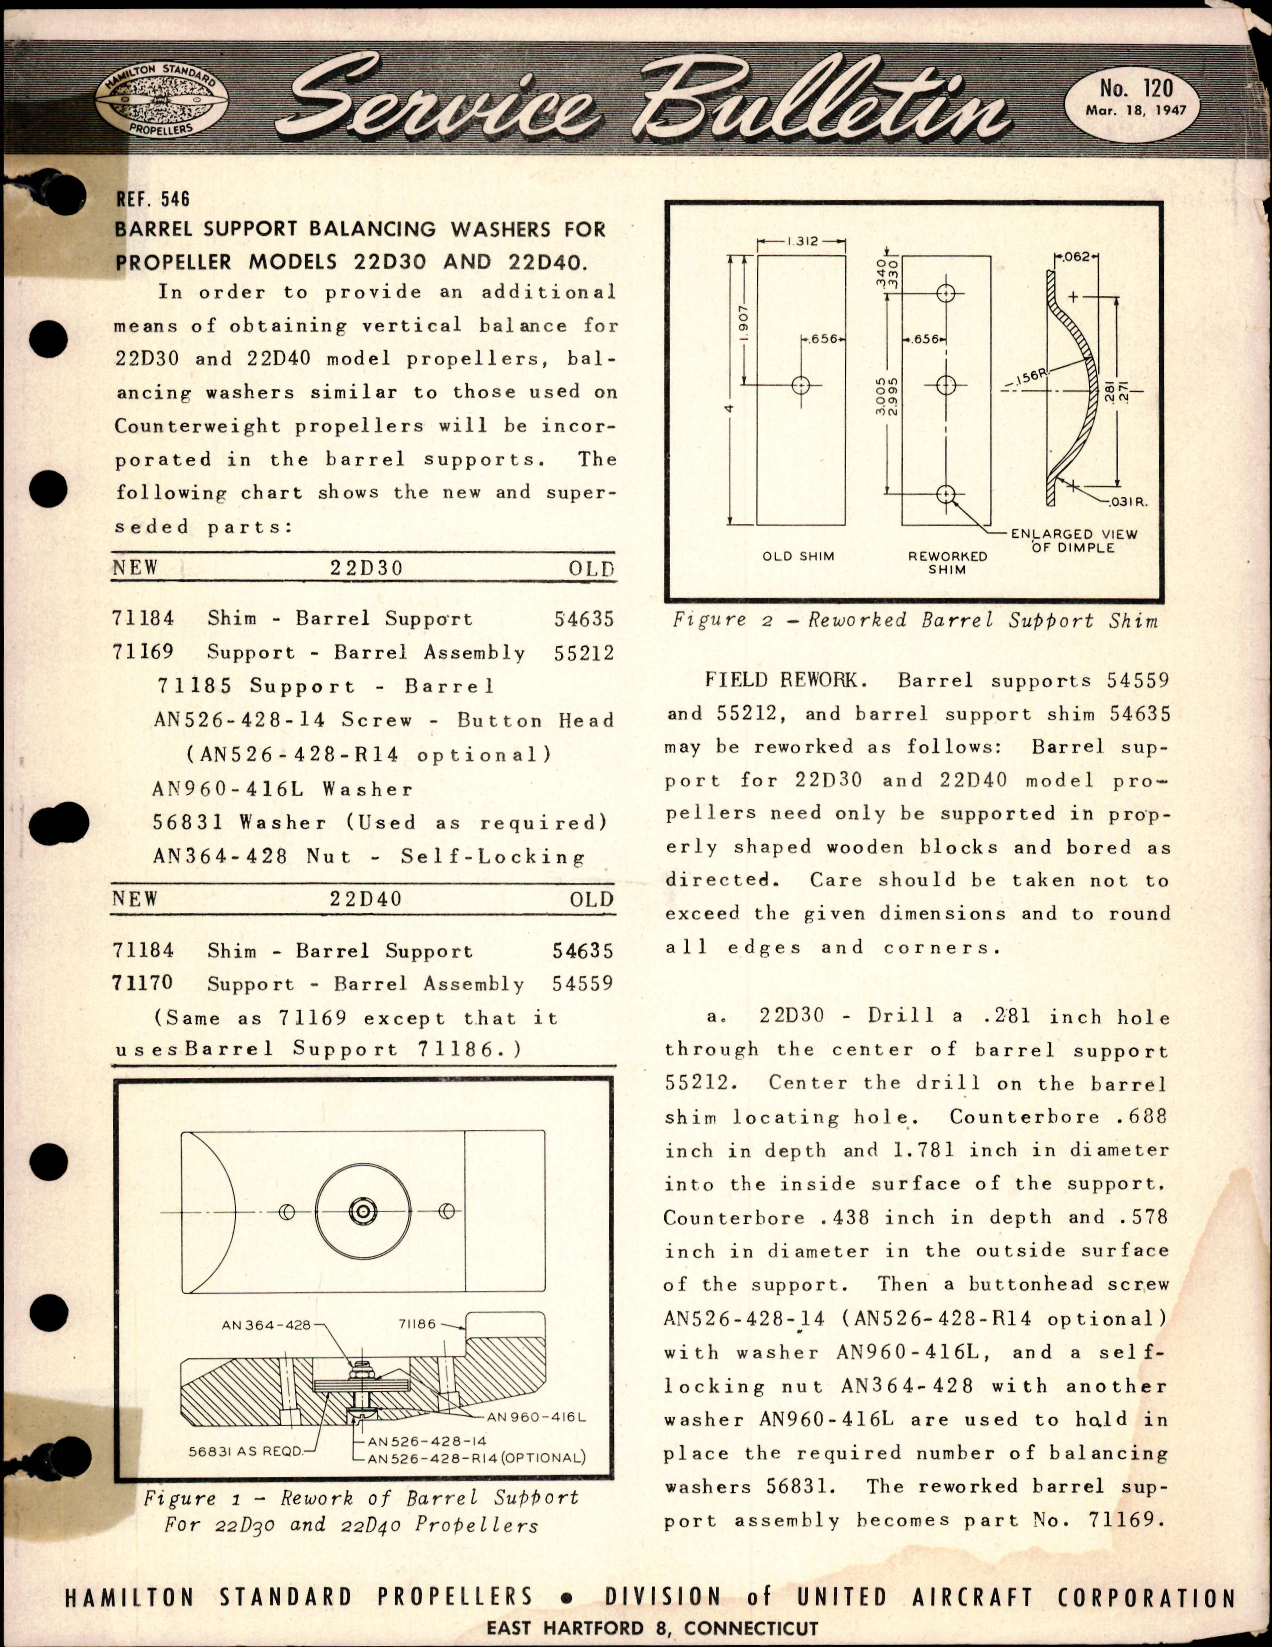 Sample page 1 from AirCorps Library document: Barrel Support Balancing Washers for Propeller Models 22D30 and 22D40, Ref 546